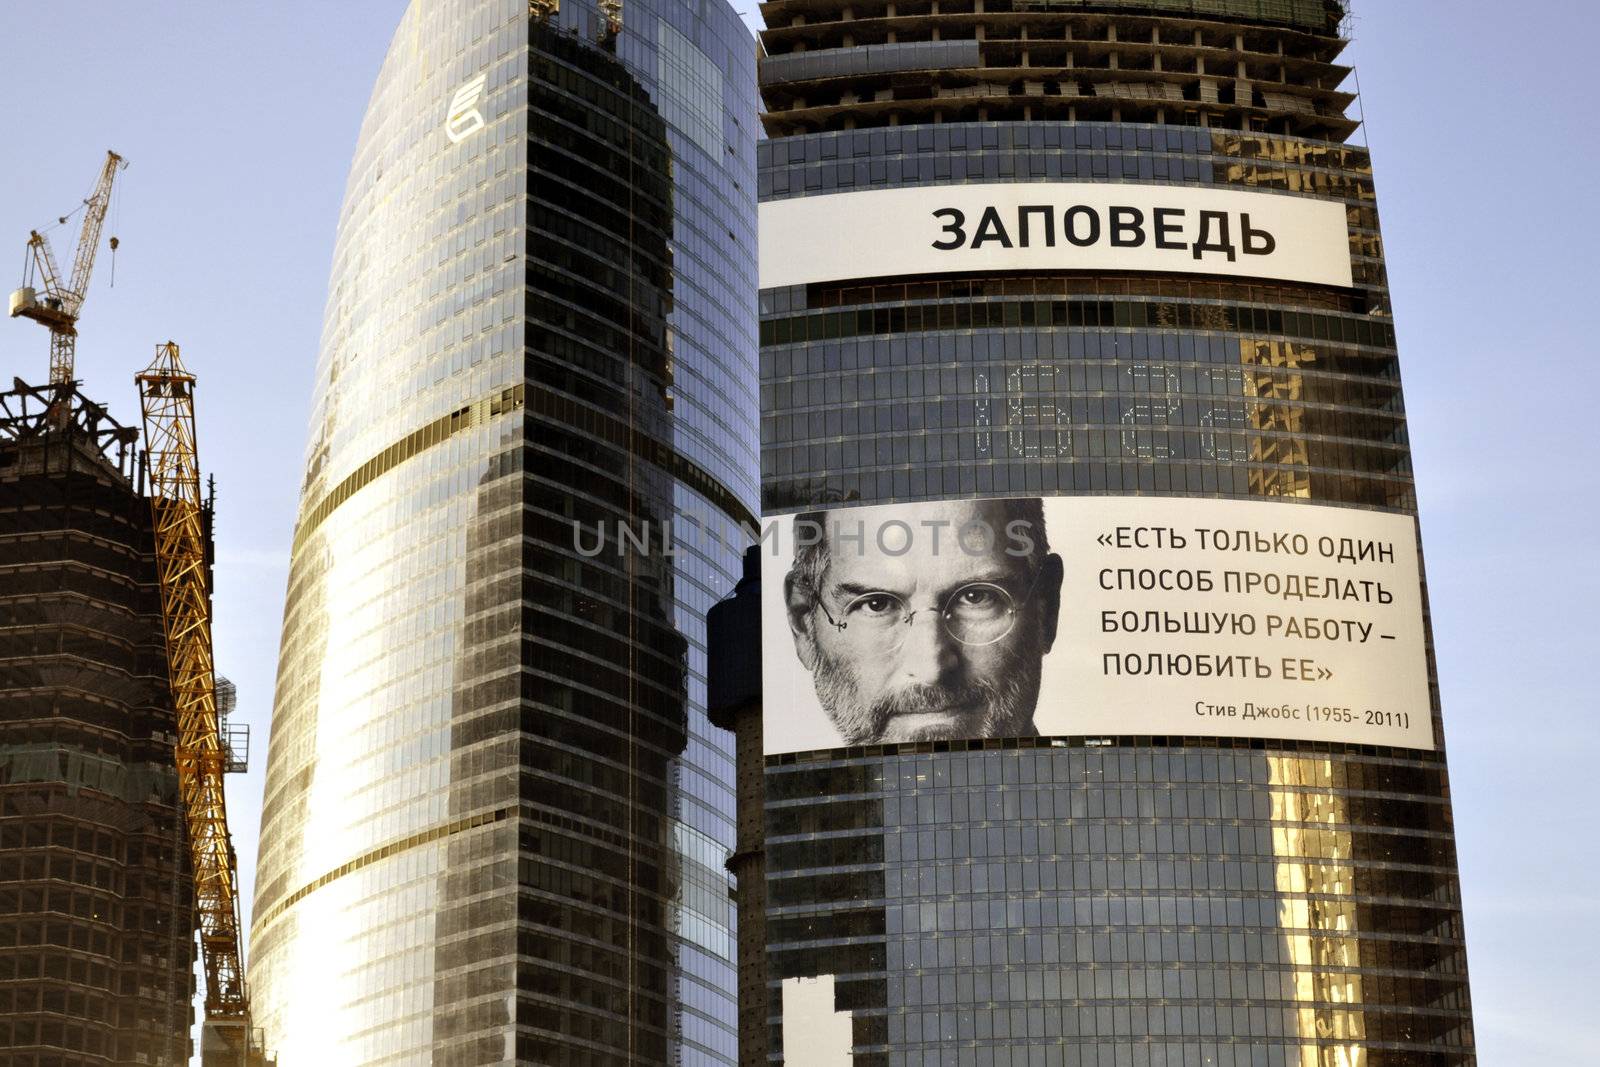 Moscow, Russia - October 22, 2011 : Apple co-founder Steve Jobs's portrait hanging in commemoration of his death on the Federation Tower of the Moscow International Business Center.